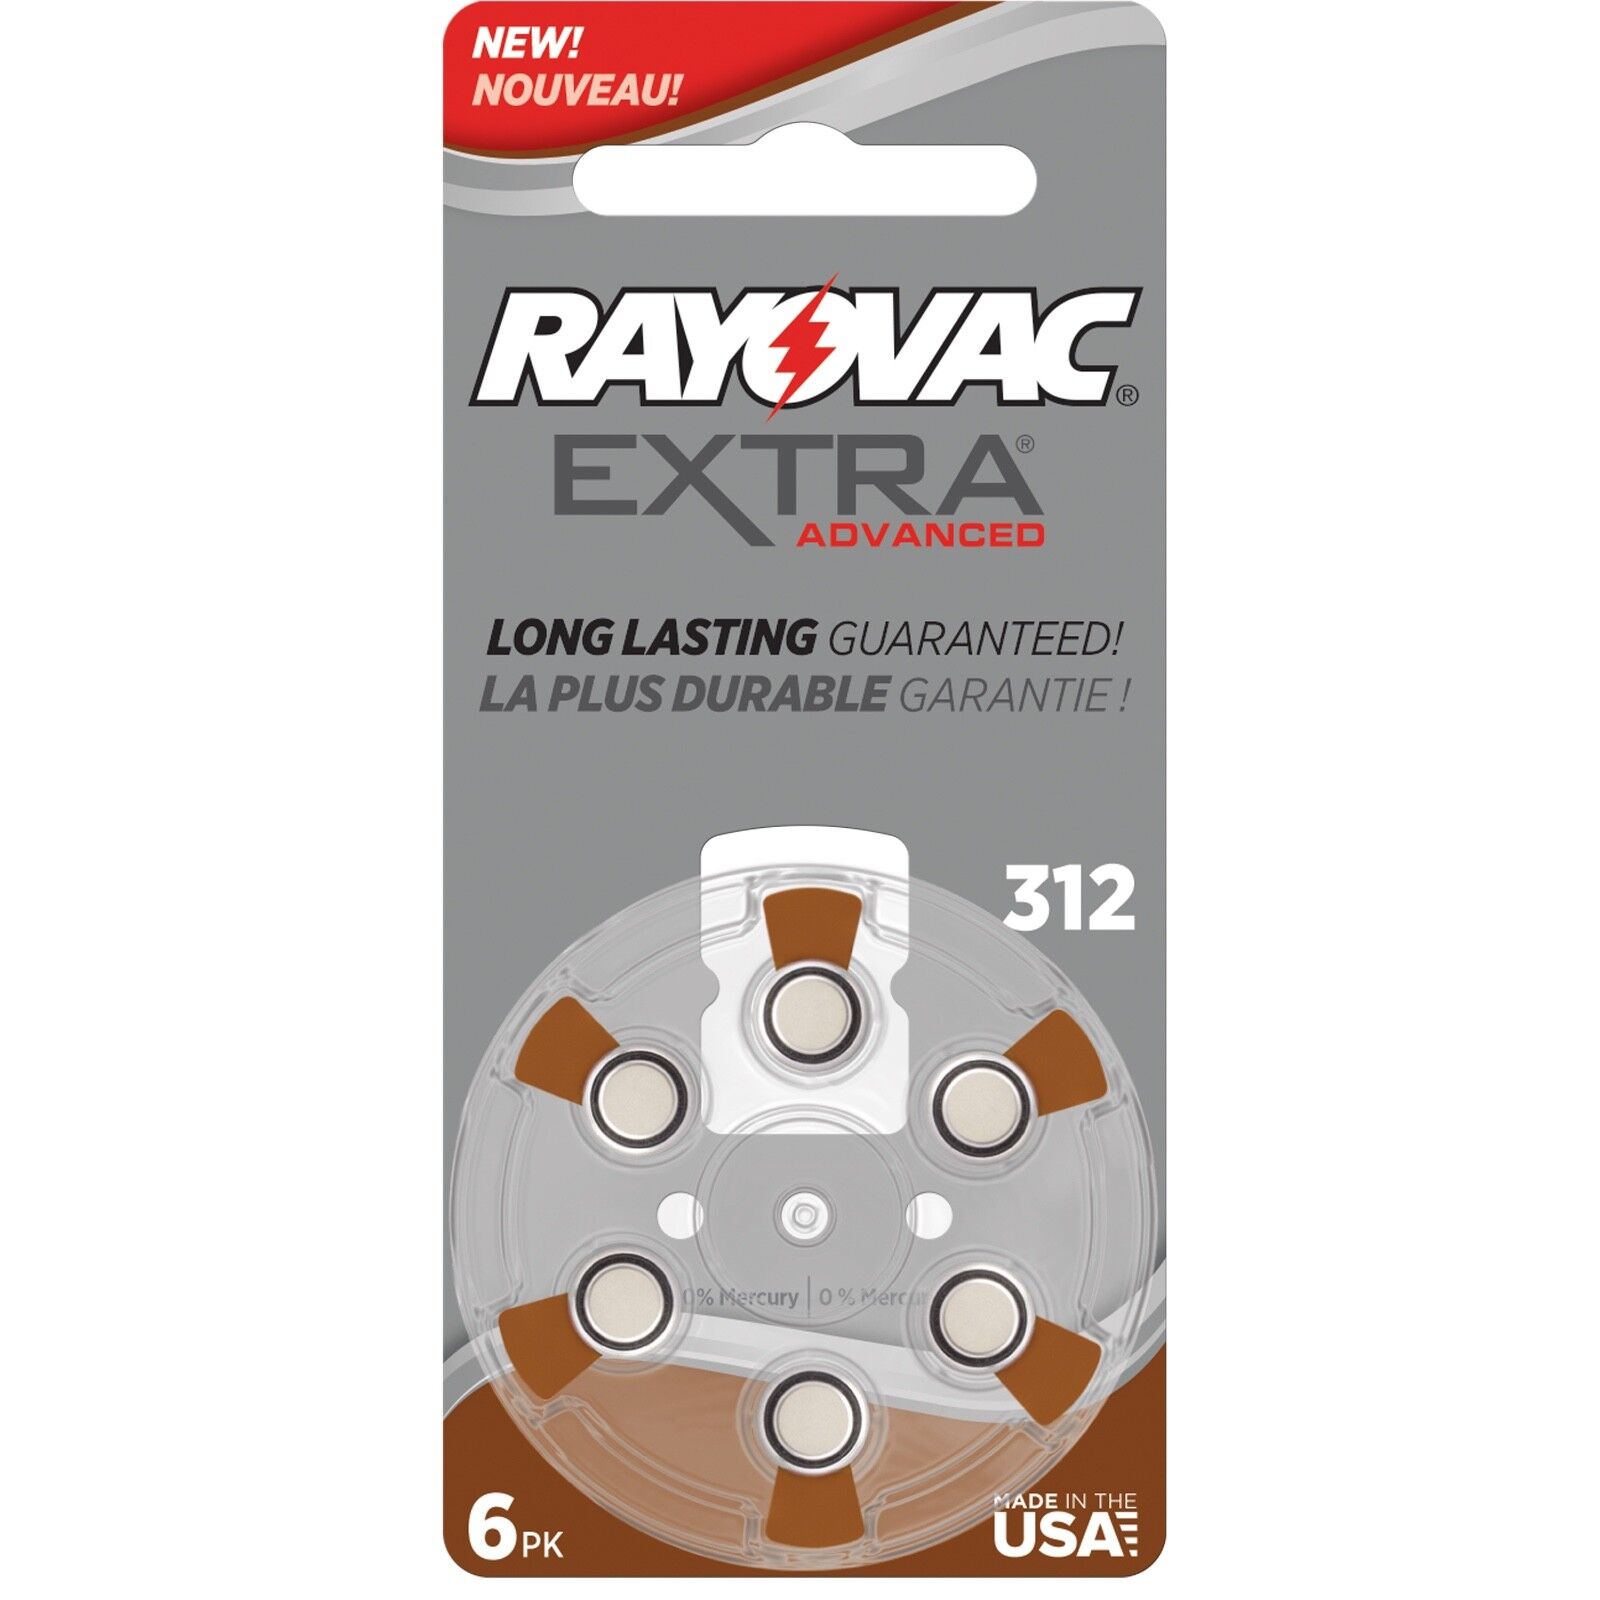 Rayovac Extra Type 312 Hearing Aid Batteries Zinc Air P312 PR41 ZL3 Pack of 60